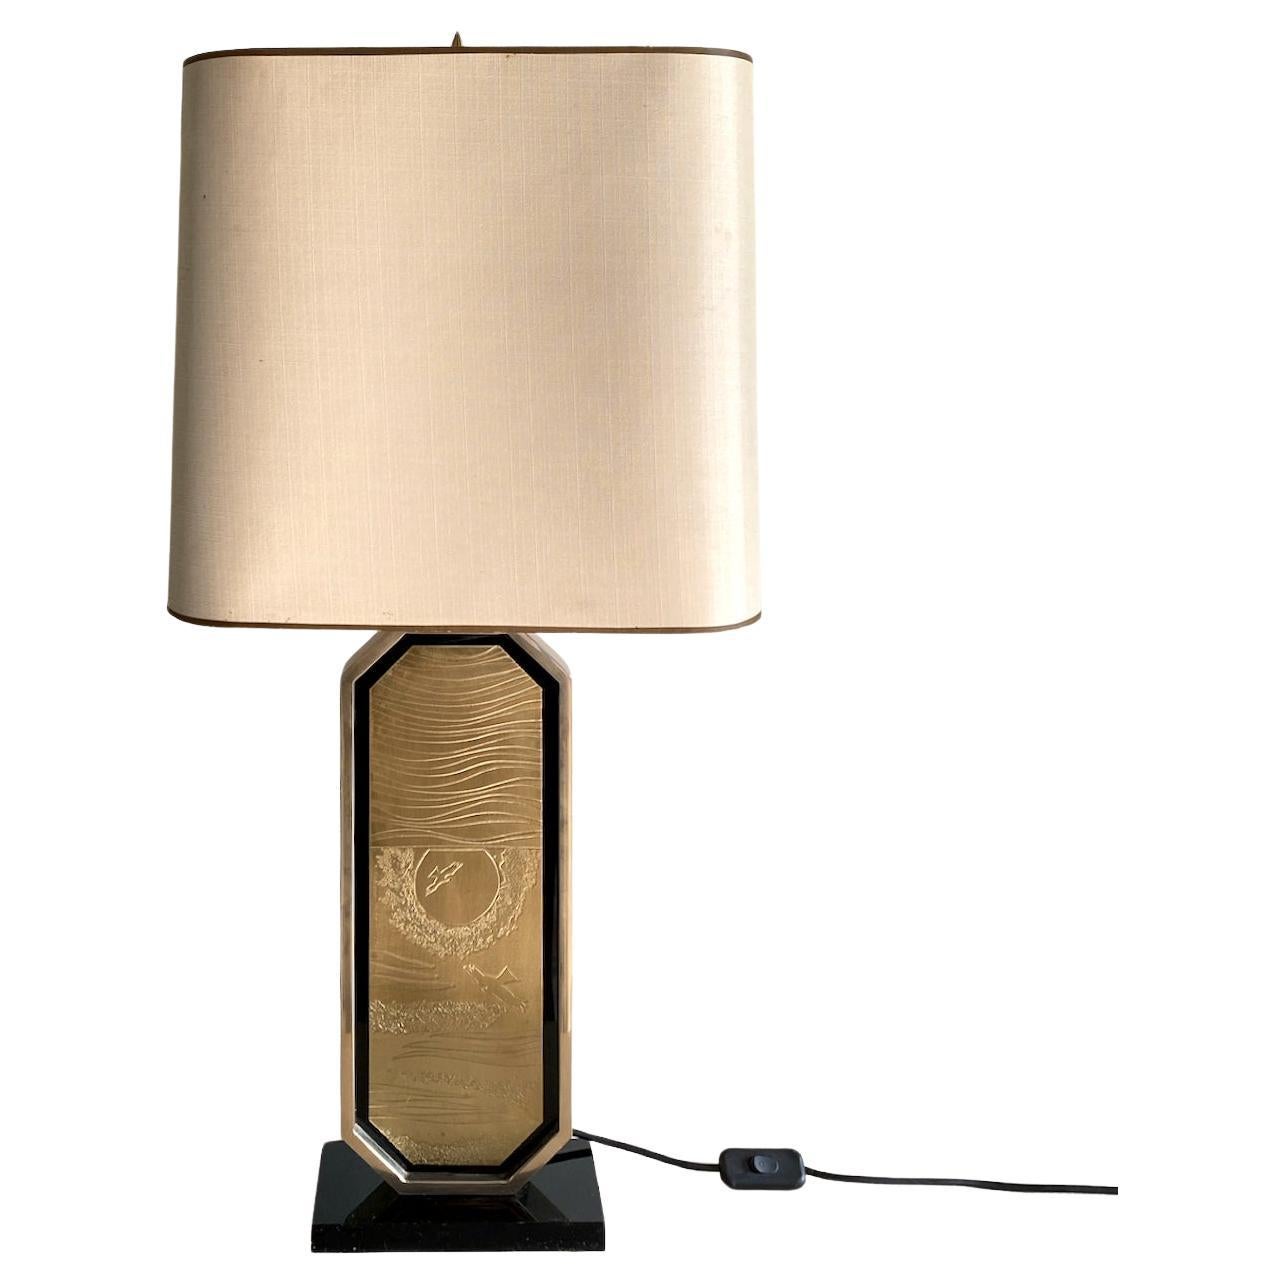 George Mathias 23kt gold plated table lamp 1970's For Sale